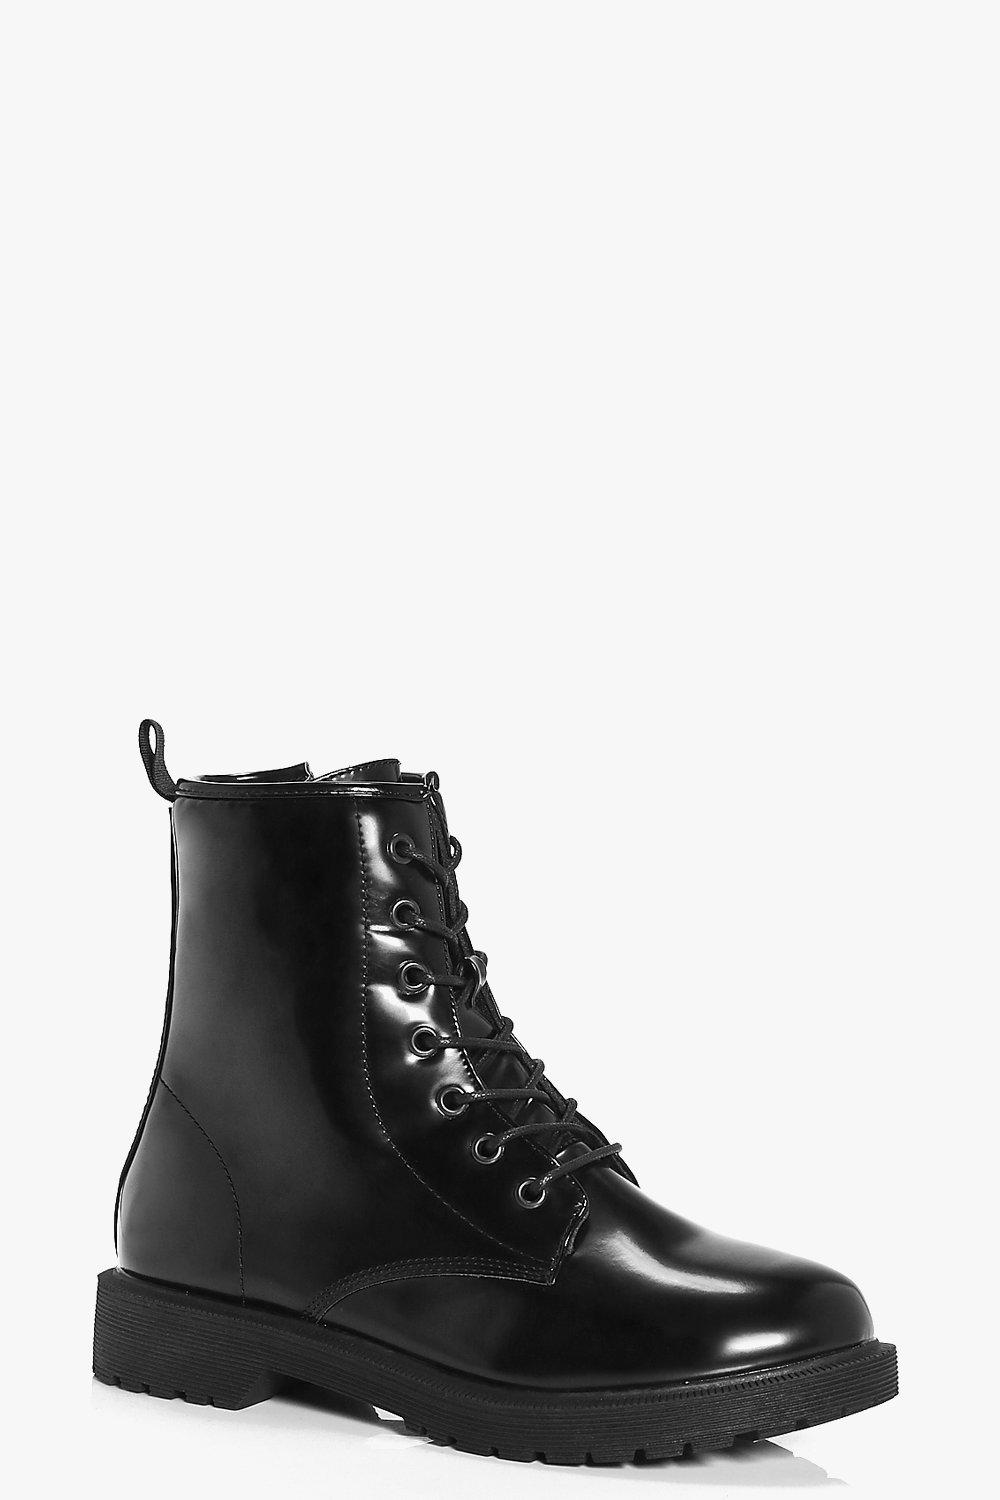 womens patent lace up boots